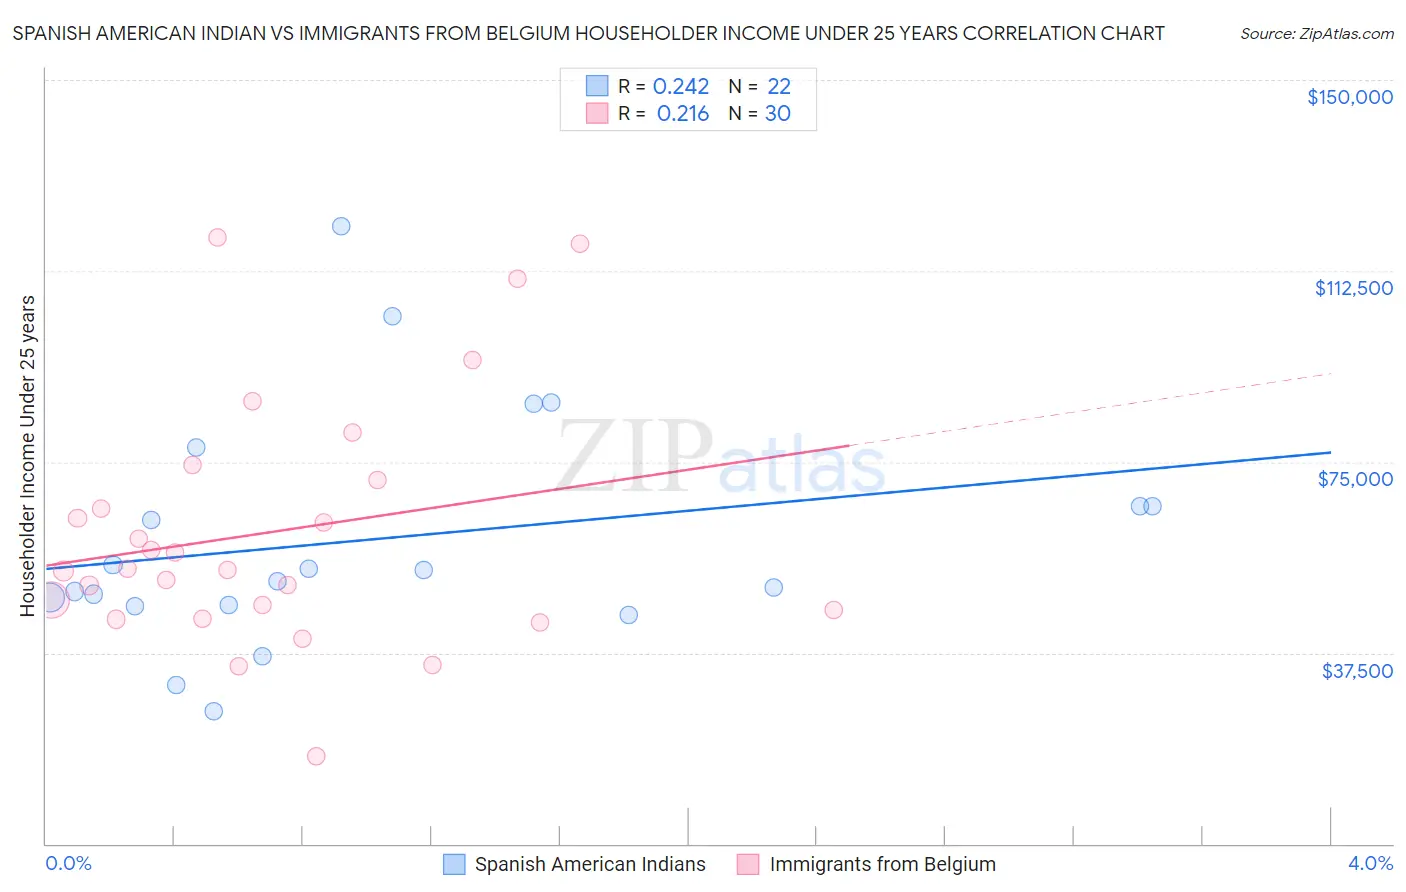 Spanish American Indian vs Immigrants from Belgium Householder Income Under 25 years